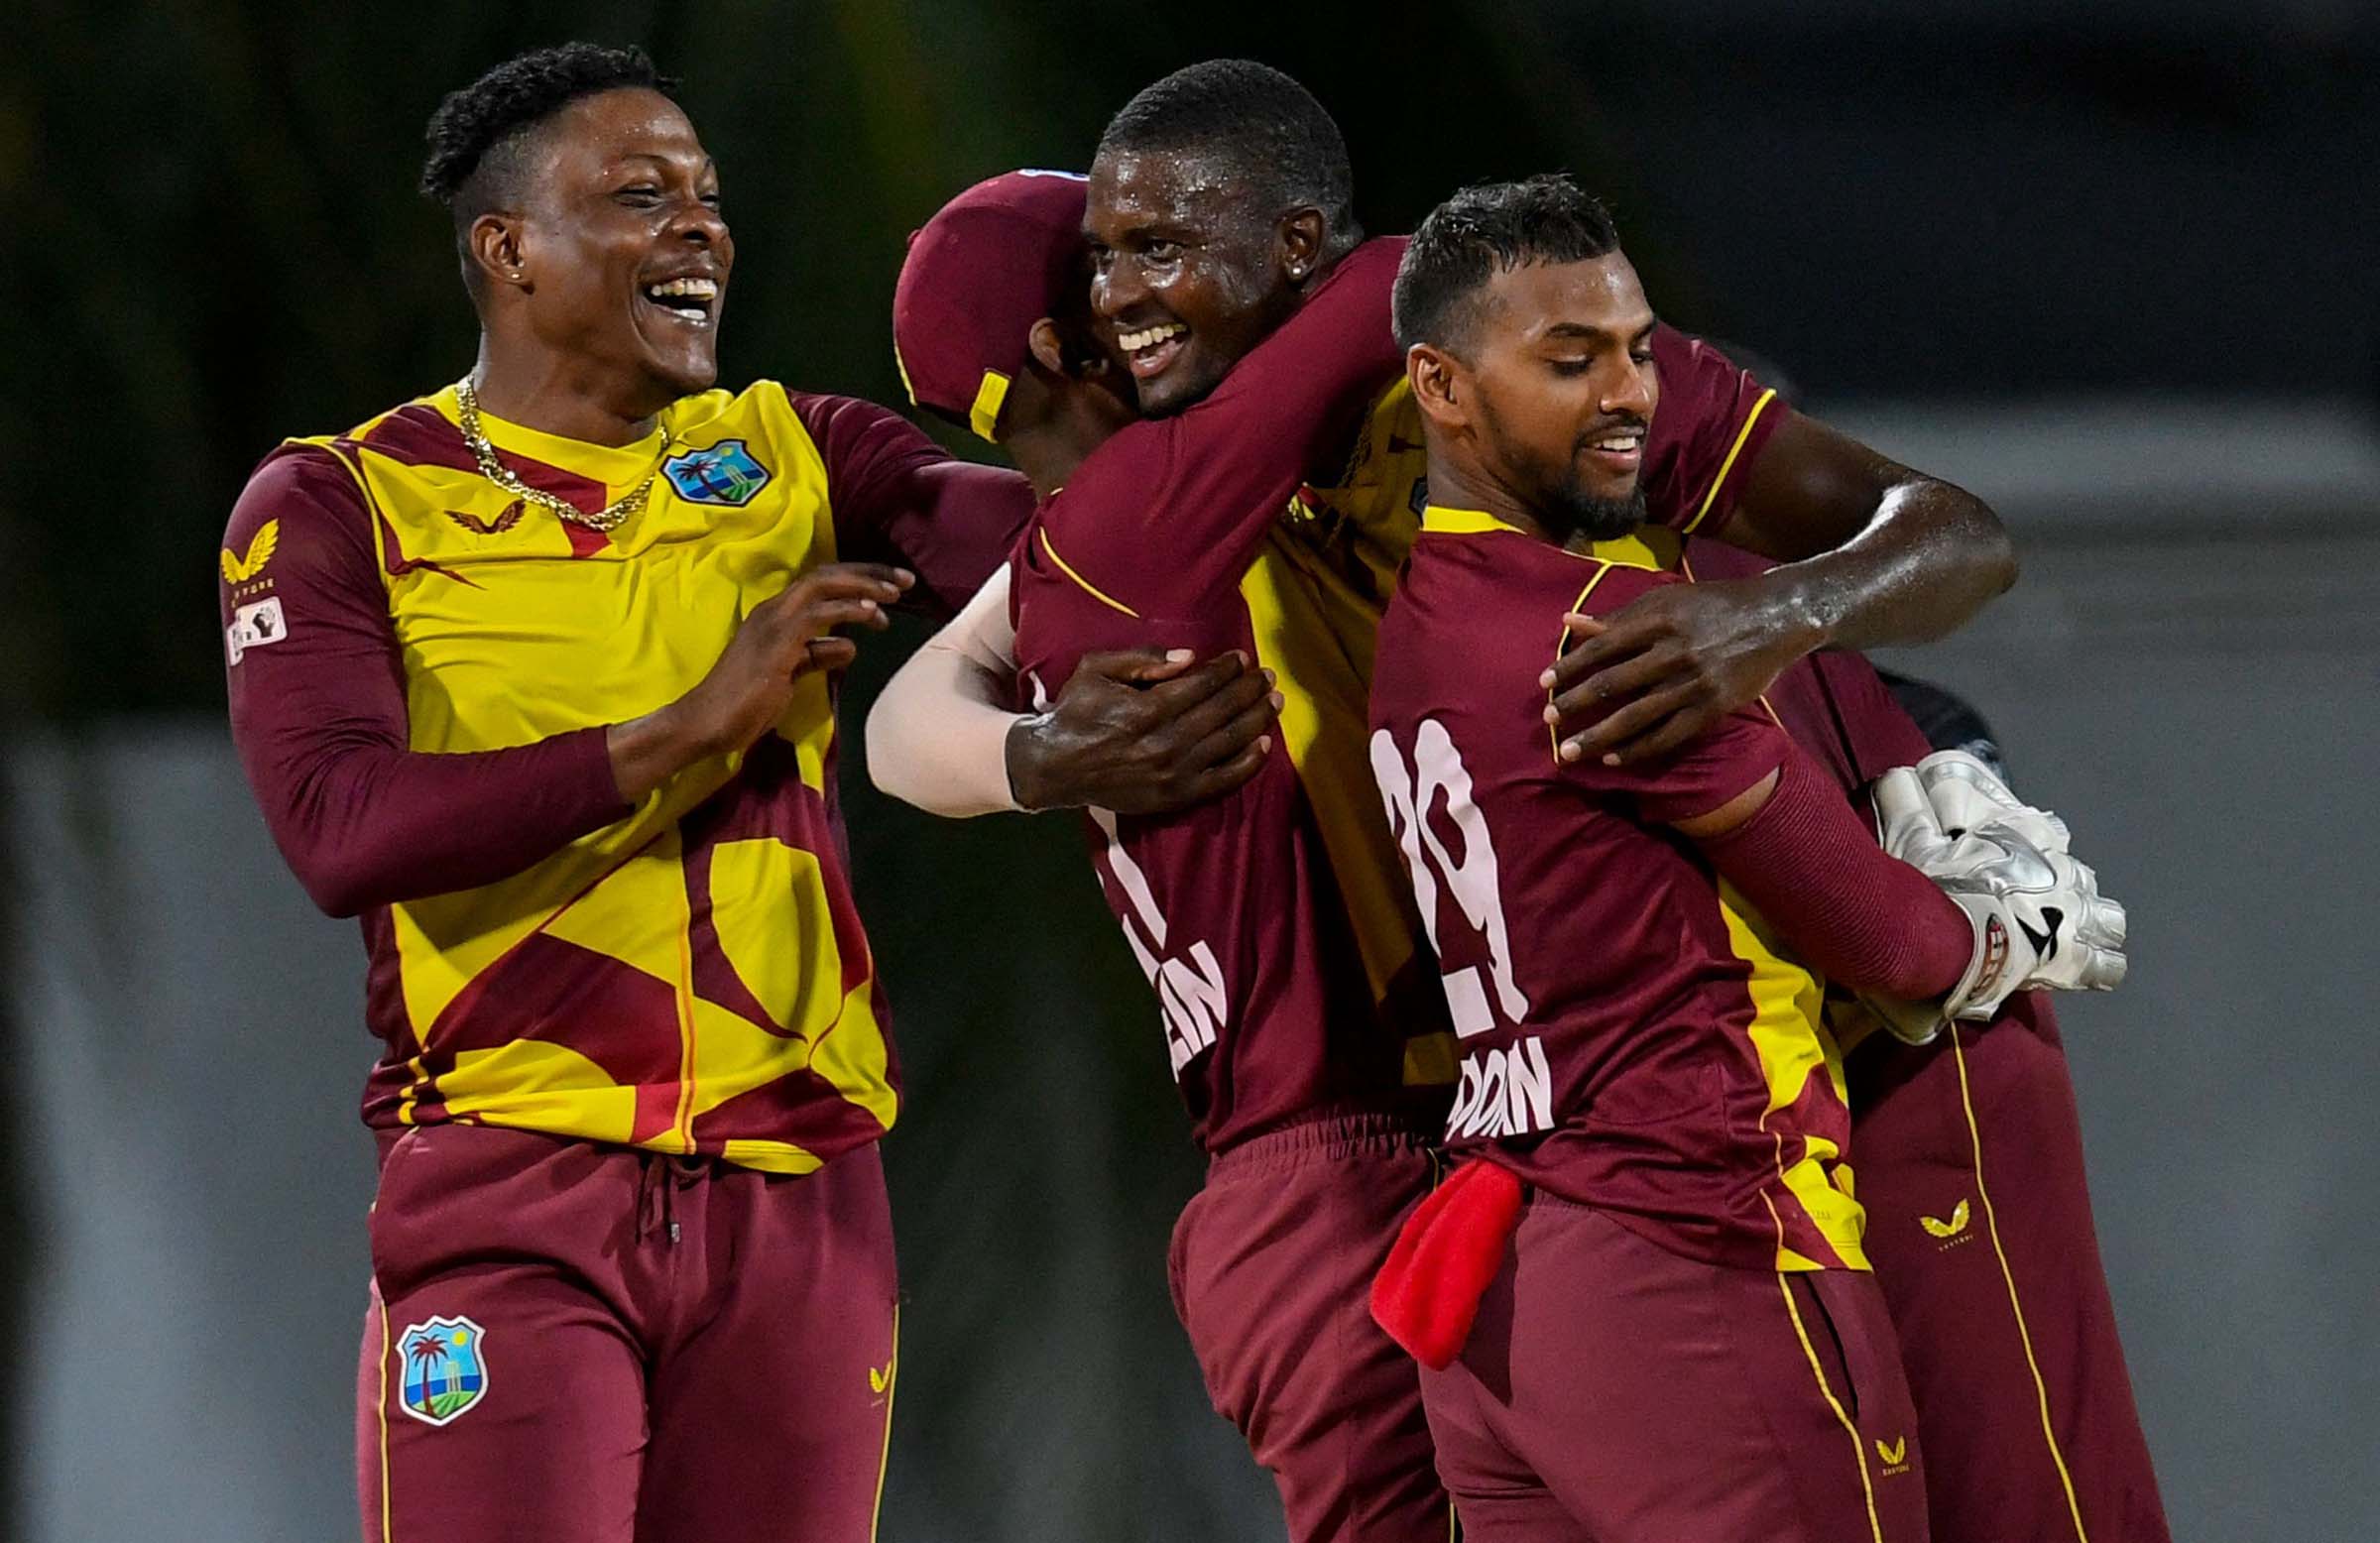 Jason Holder was rested for the ODI tours | Getty Images